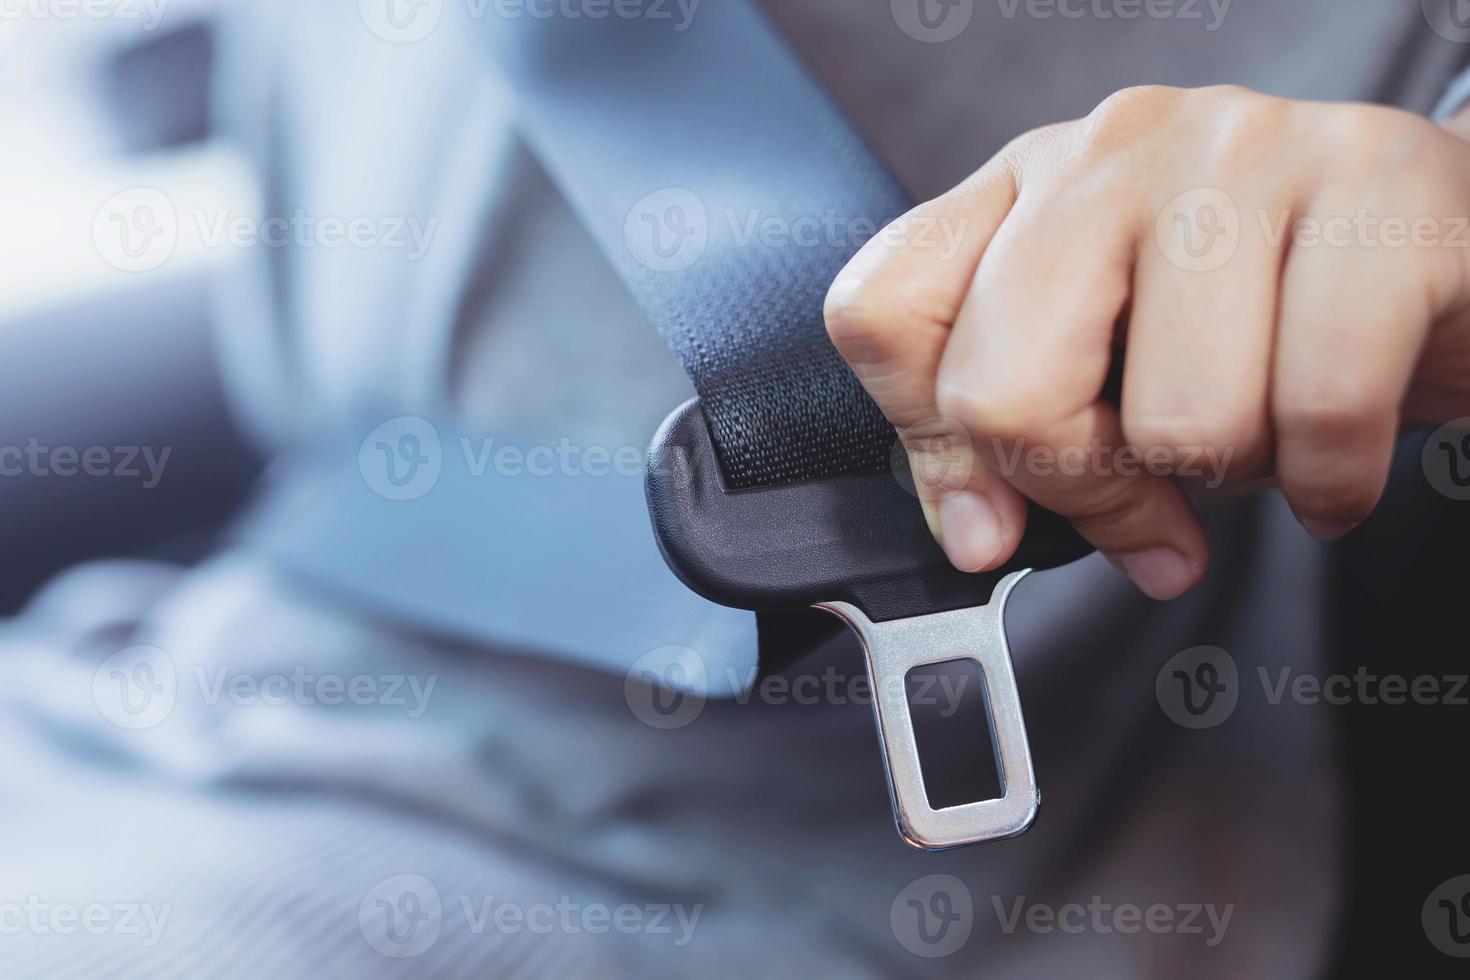 The driver wearing a seat belt for safety photo